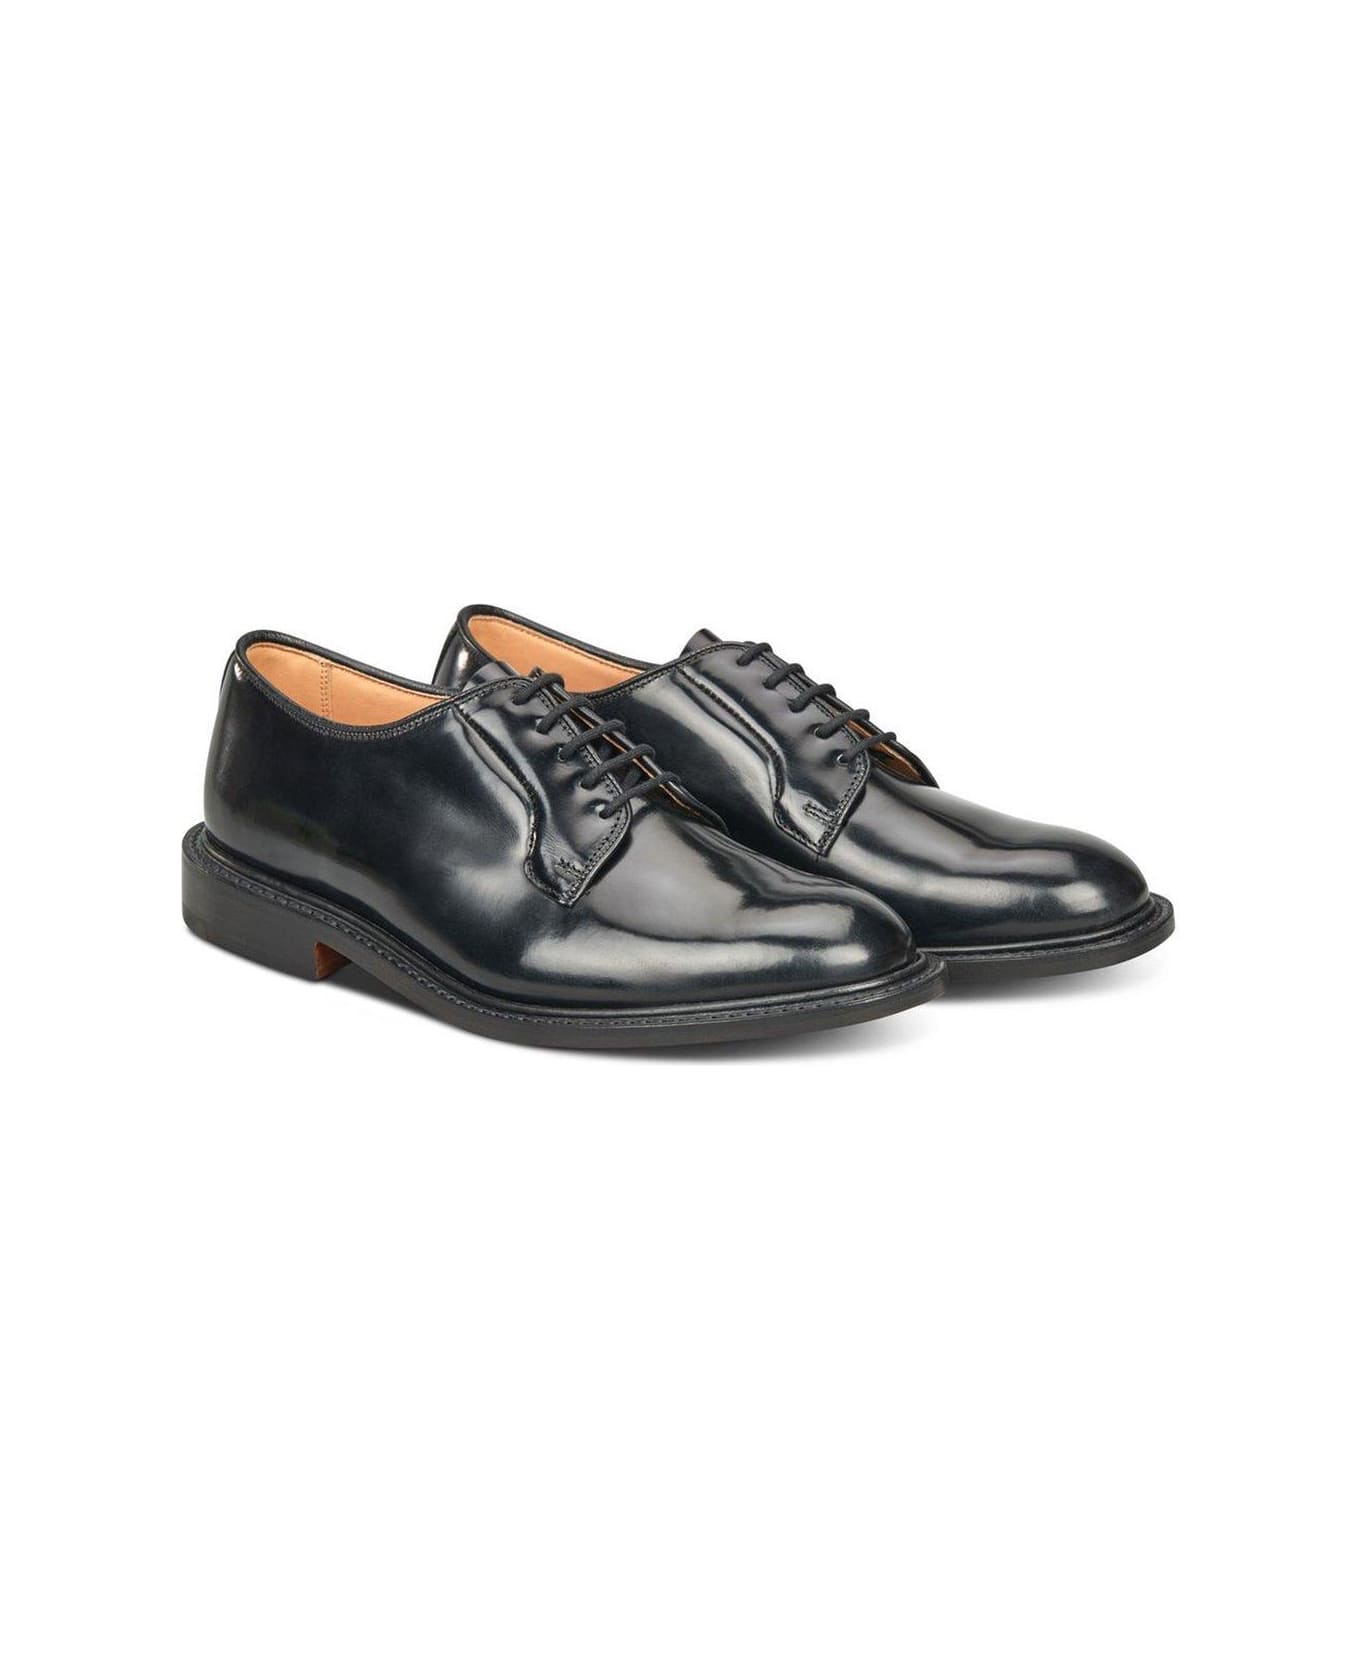 Tricker's Lace-up Derby Shoes Laced Shoes - NERO ローファー＆デッキシューズ